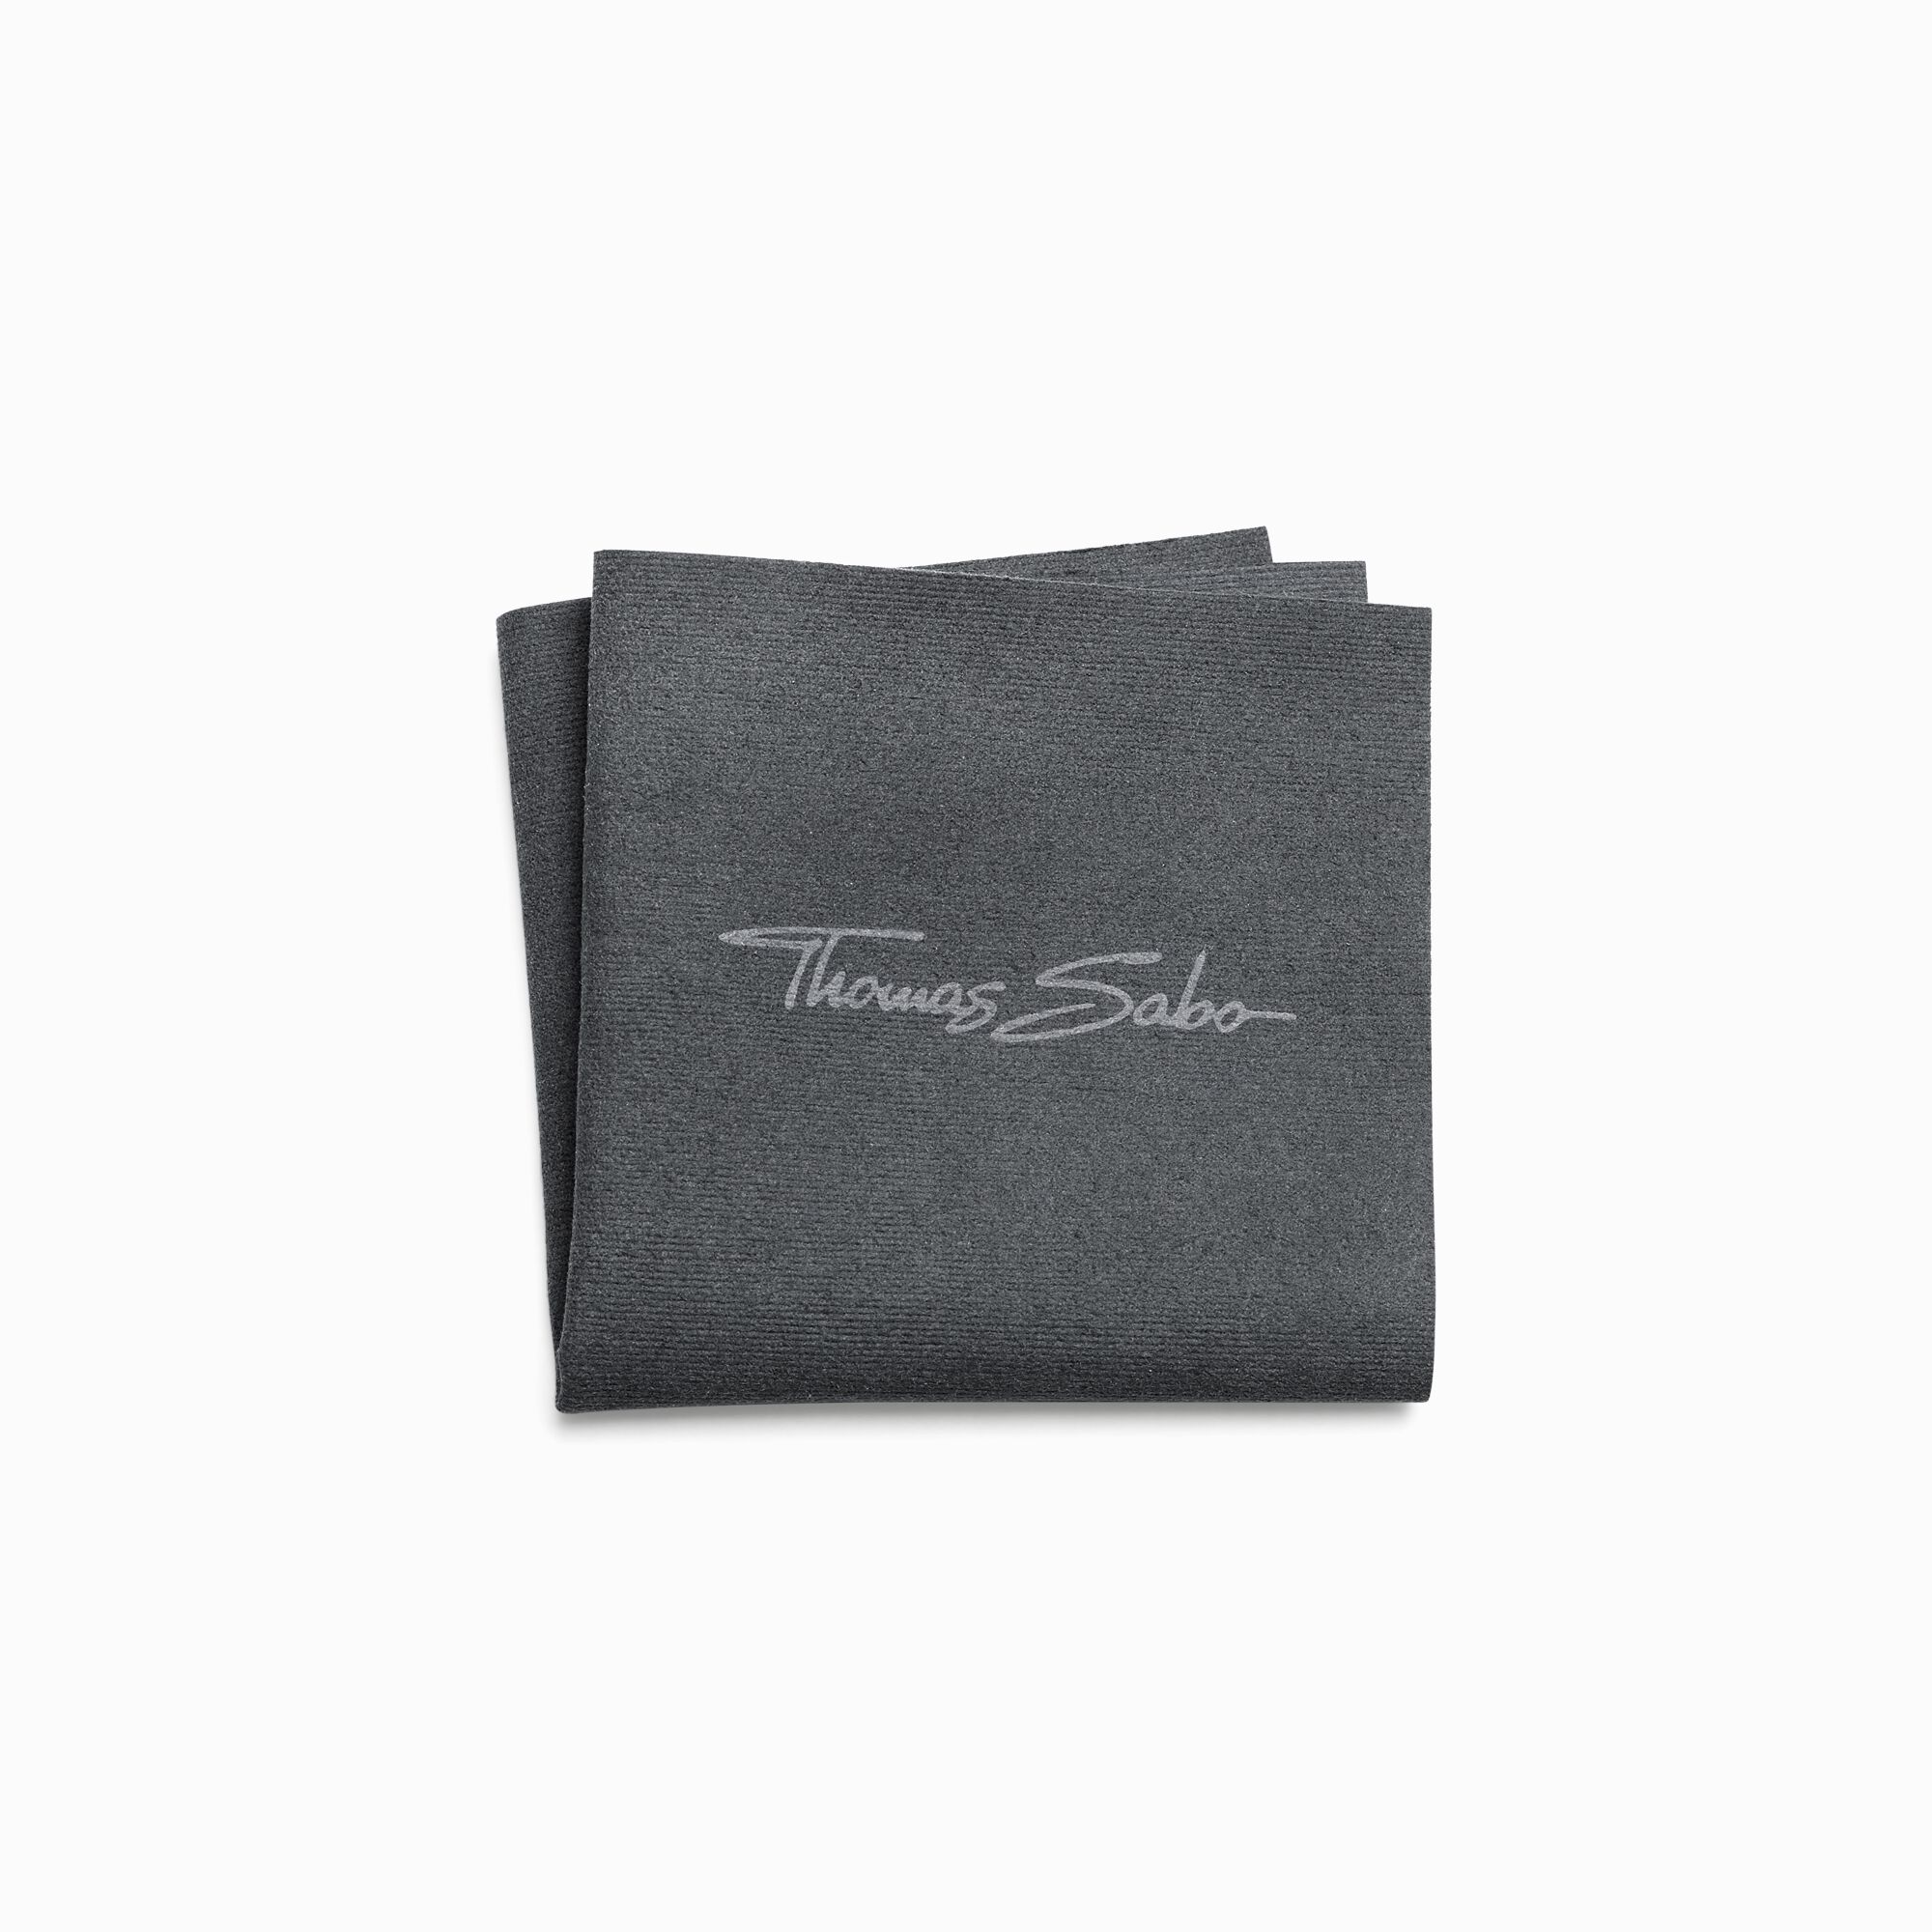 Jewellery cleaningcloth 16x16cm grey,mf. from the  collection in the THOMAS SABO online store